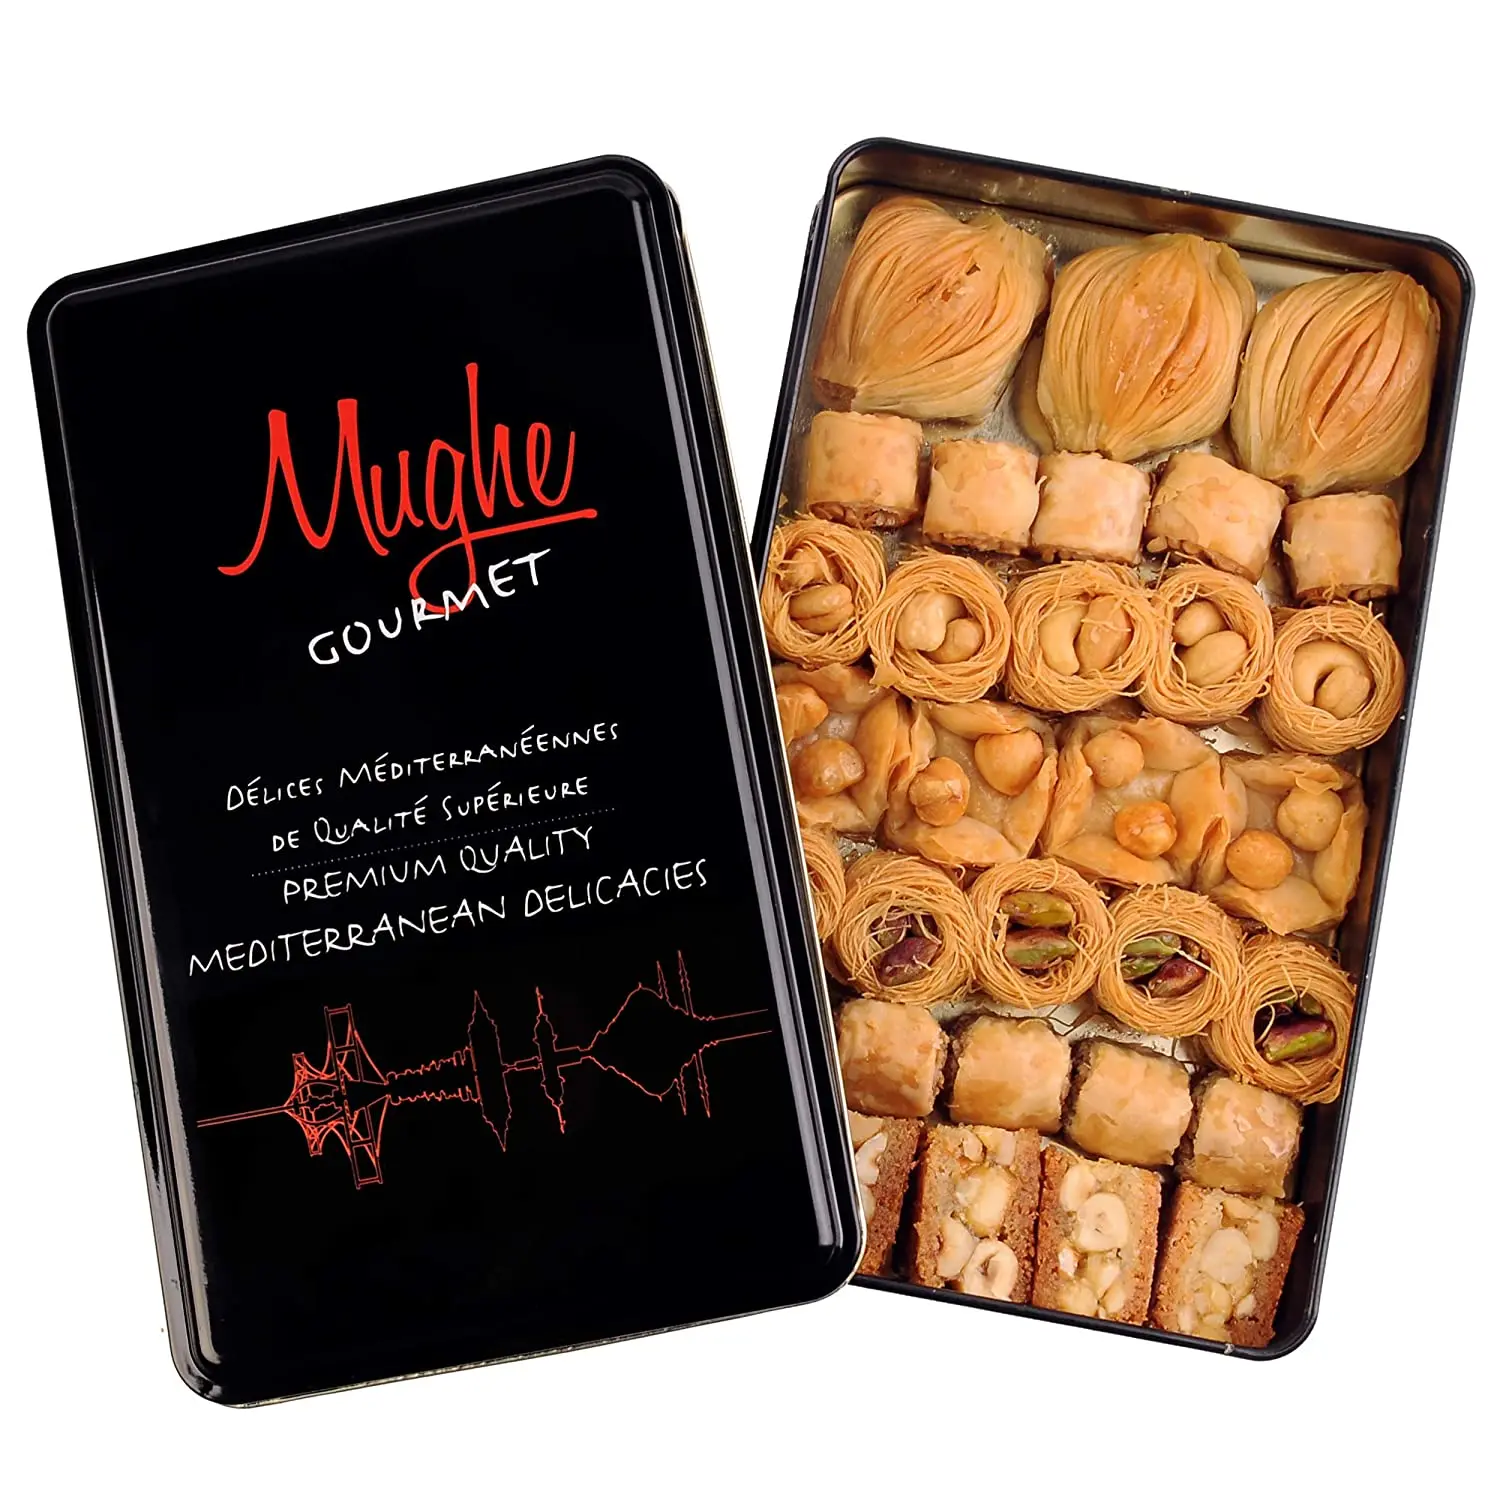 

Premium Assorted Baklava Pastry Dessert Gift Tin Box 500g ℮ 1.1lb 32 pcs - Unique Festive Holiday Gifts for Christmas